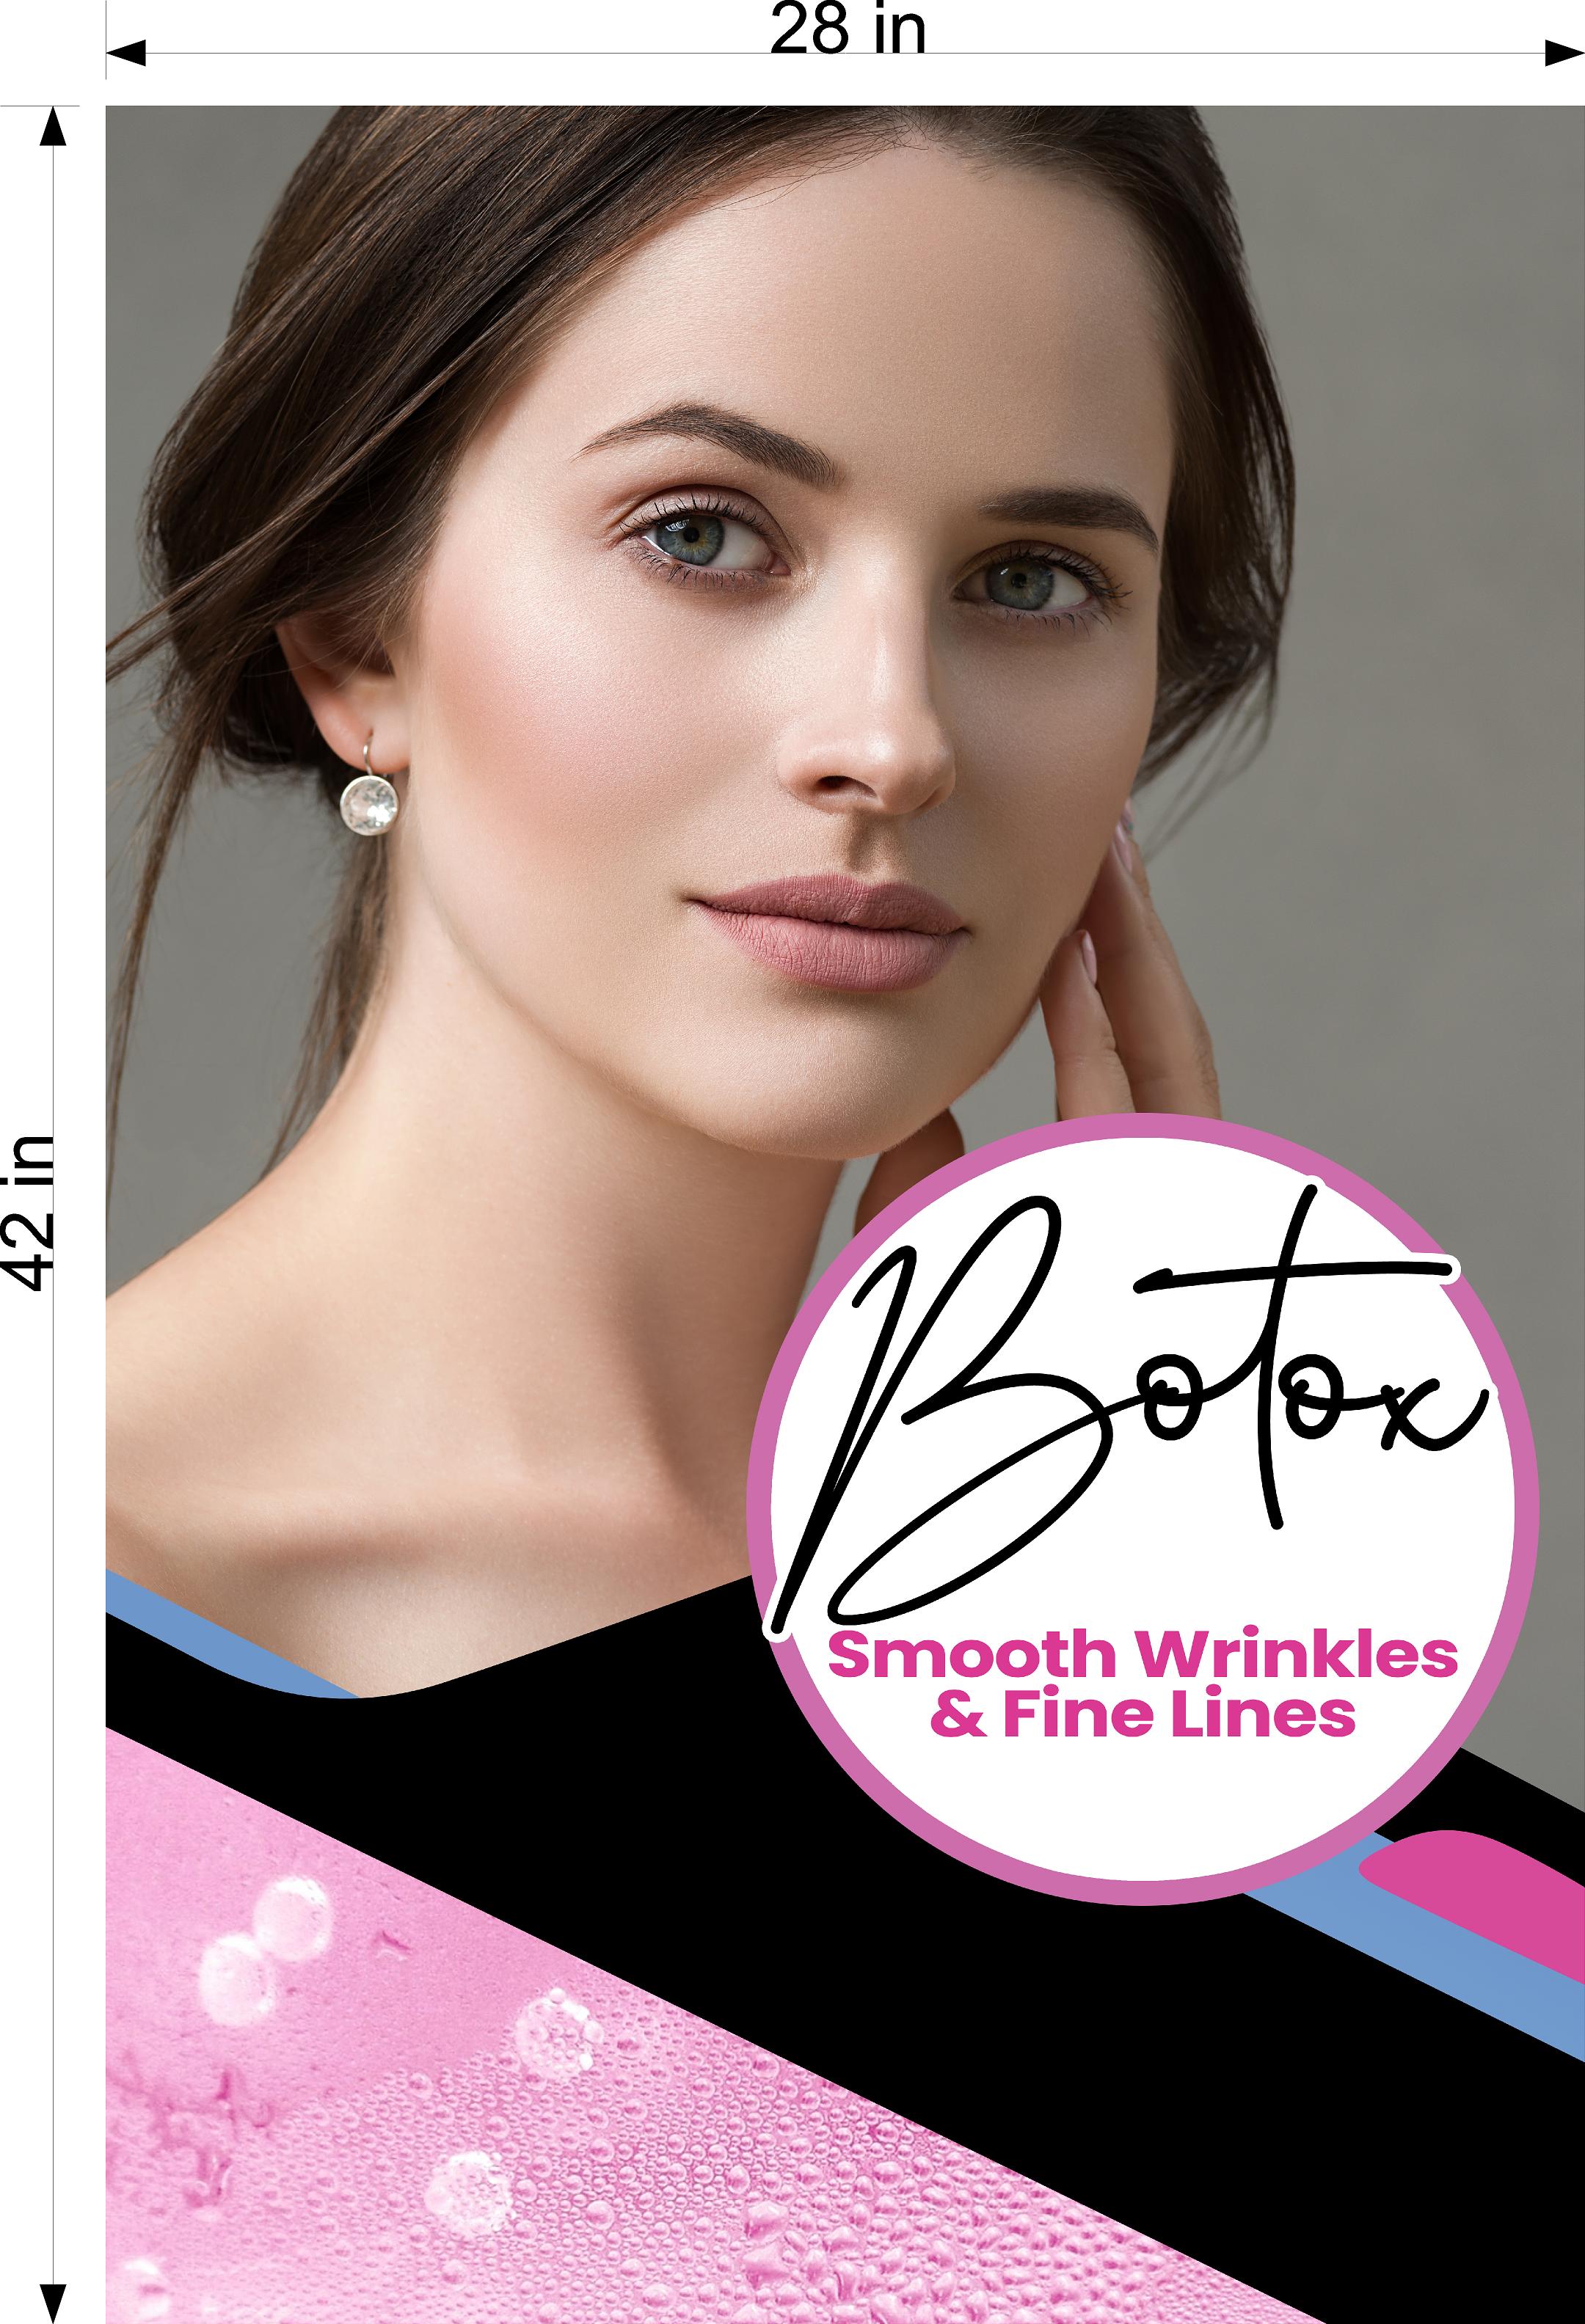 Botox 16 Photo-Realistic Paper Poster Premium Interior Inside Sign Advertising Marketing Wall Window Non-Laminated Vertical